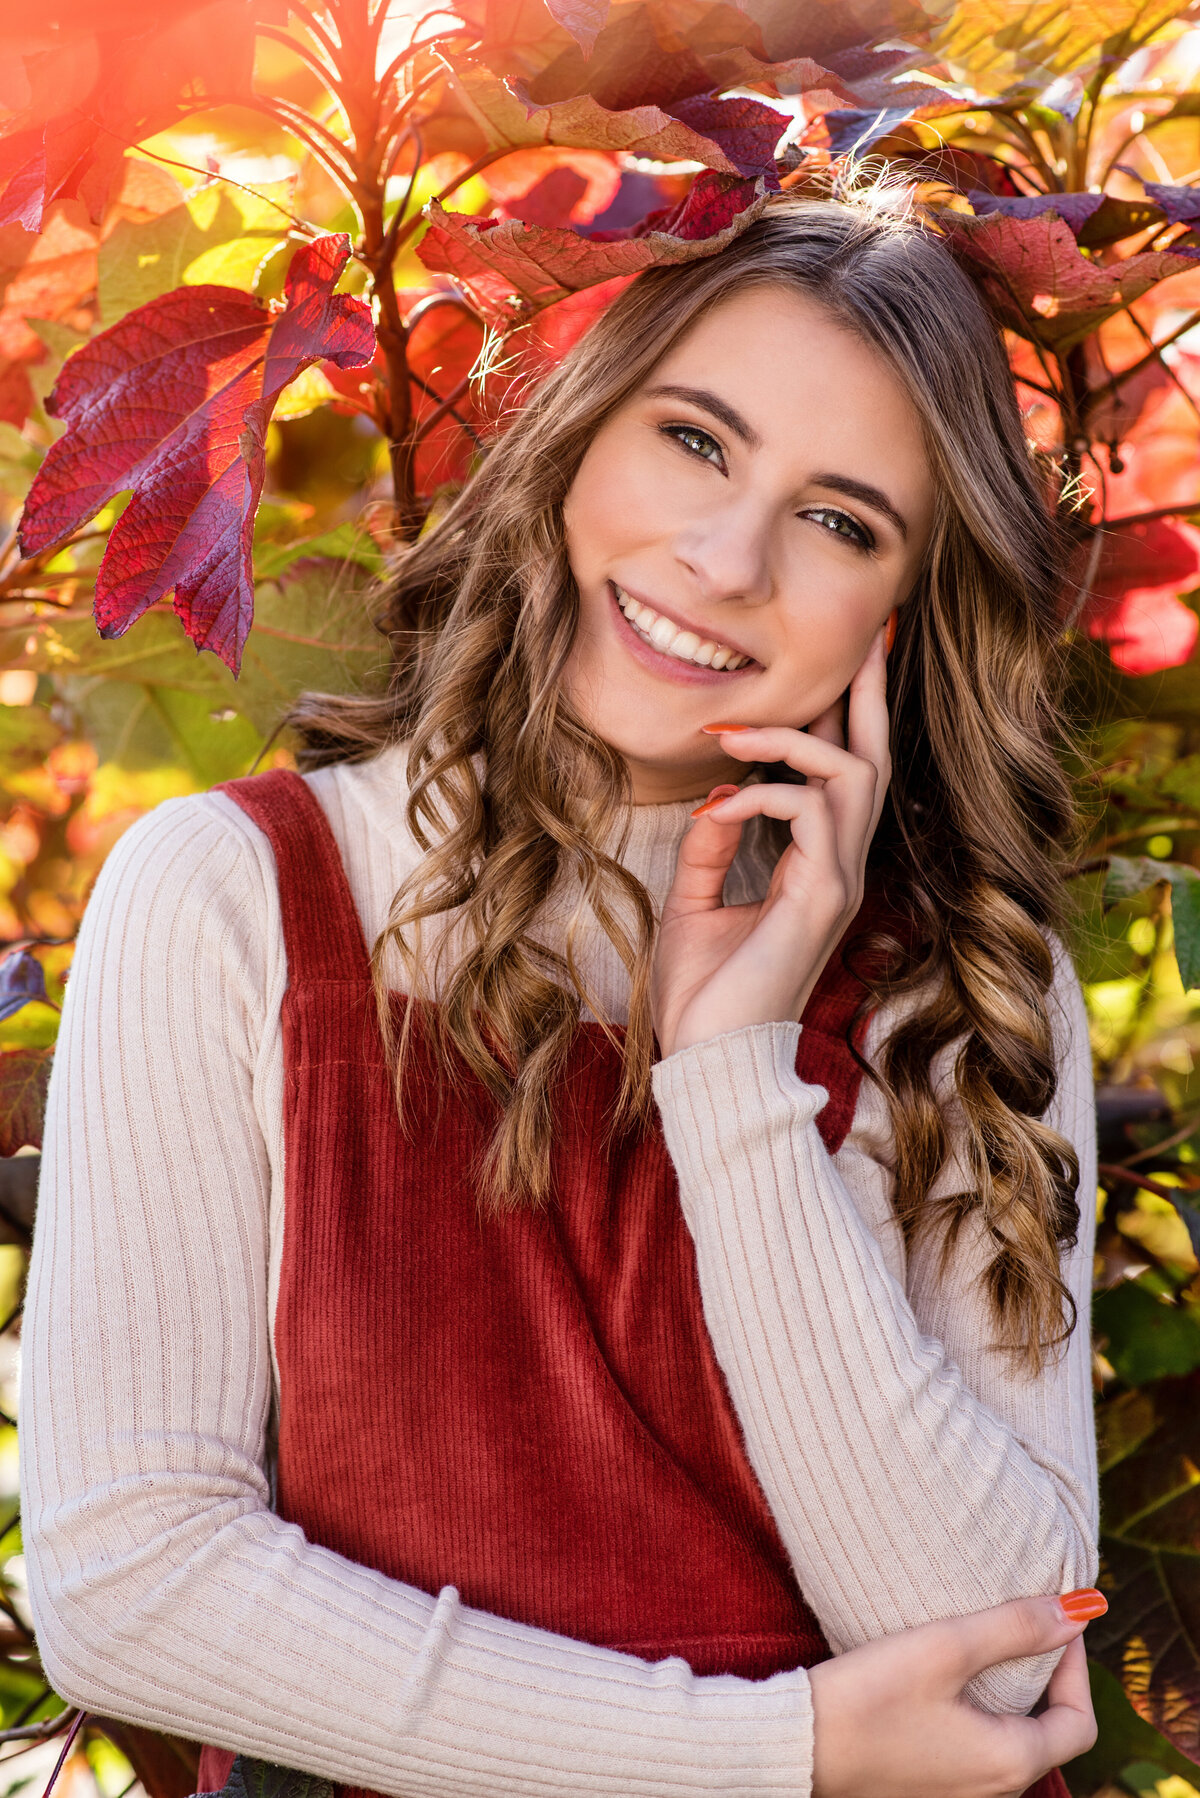 High school senior girl poses for her senior portraits during fall in the colorful leaves.